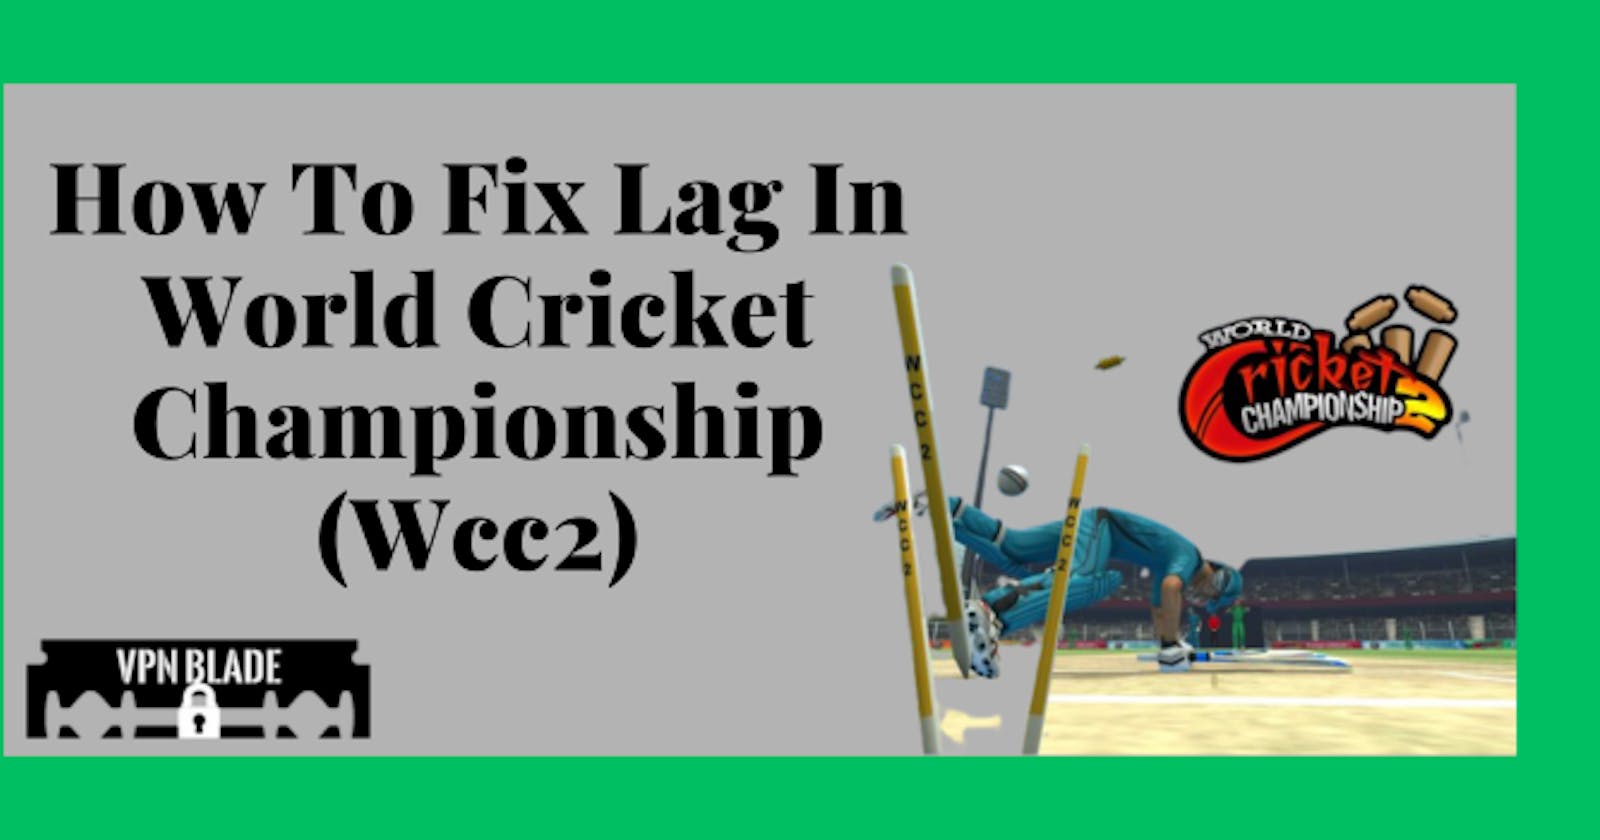 How To Fix Lag In World Cricket Championship (Wcc2)